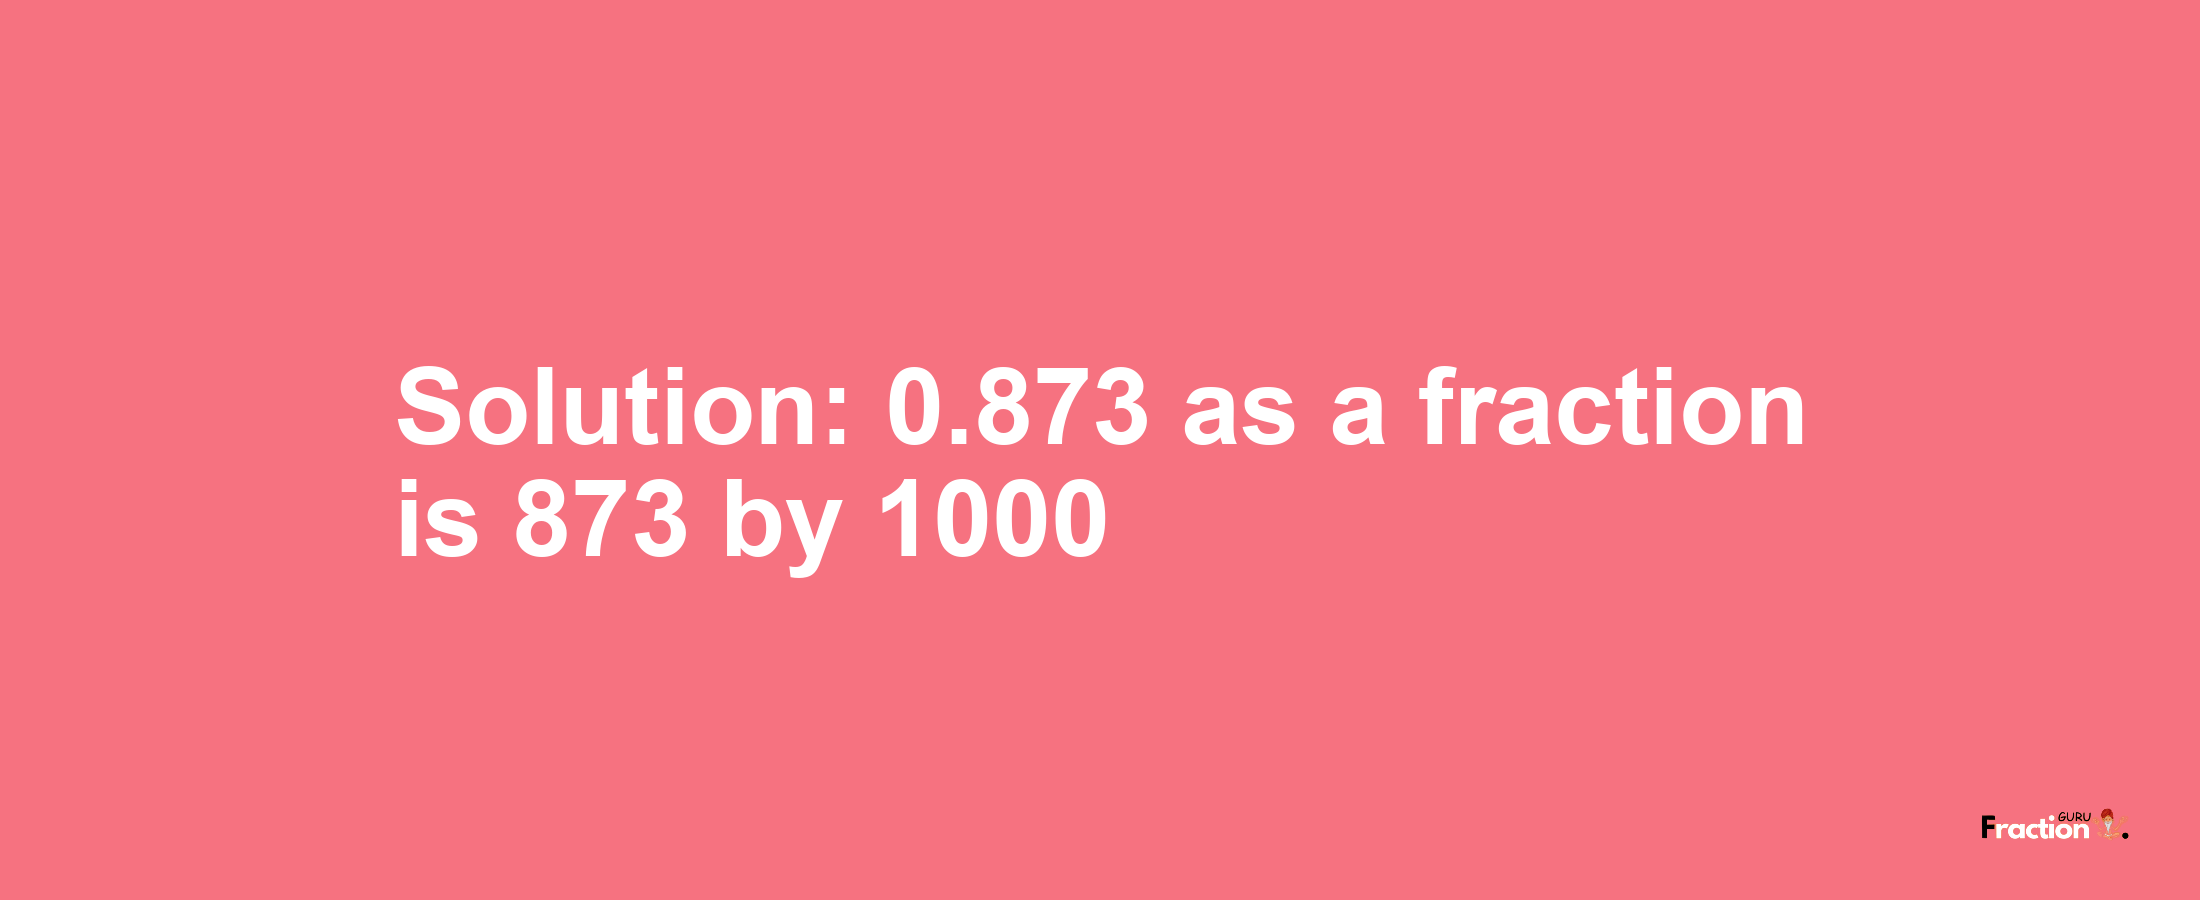 Solution:0.873 as a fraction is 873/1000